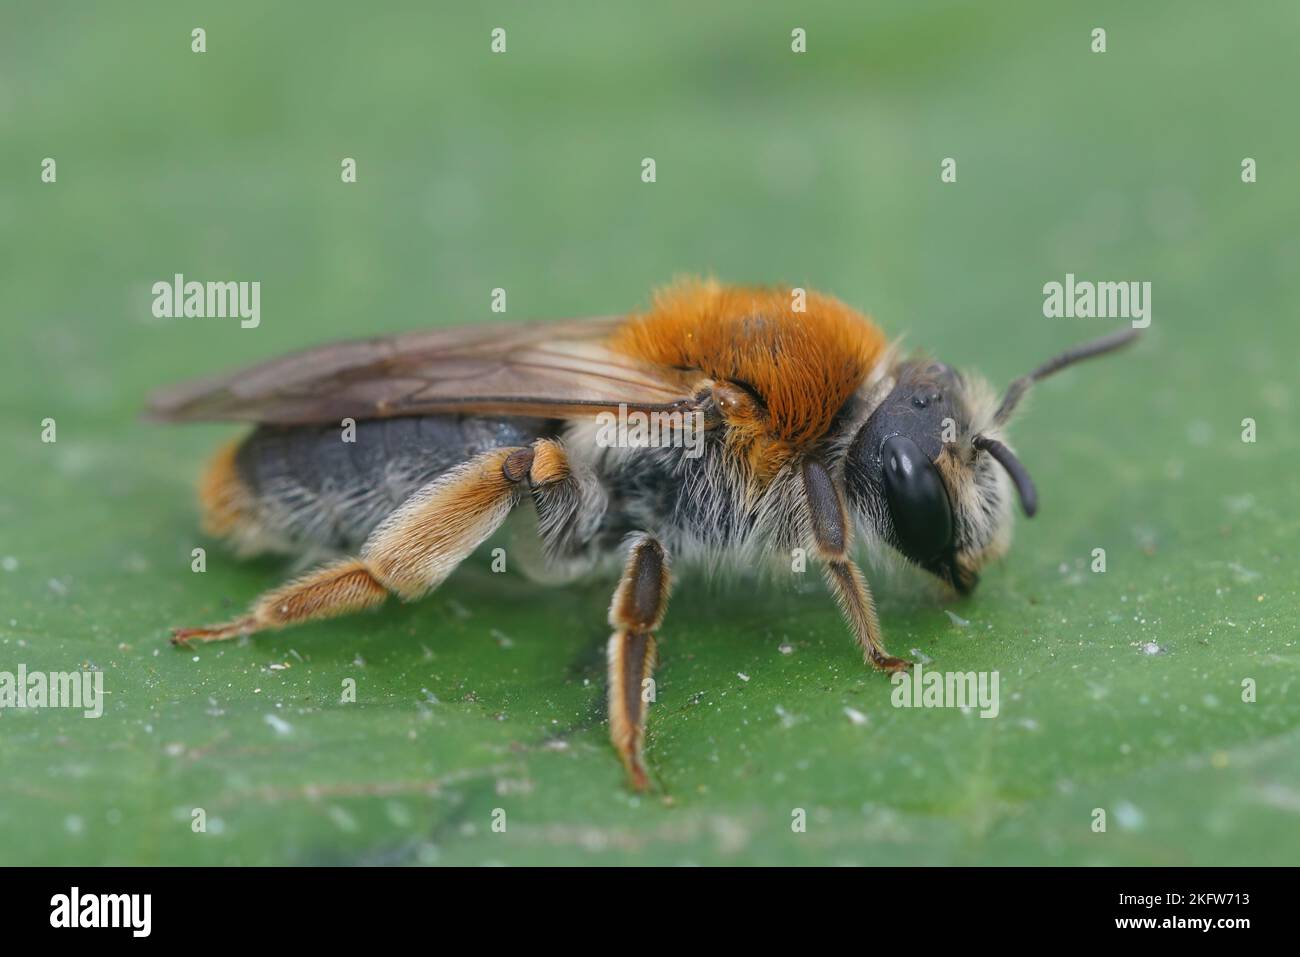 Detailed closeup on a colorful female Orange tailed mining bee, Andrena haemorrhoa on a green leaf Stock Photo